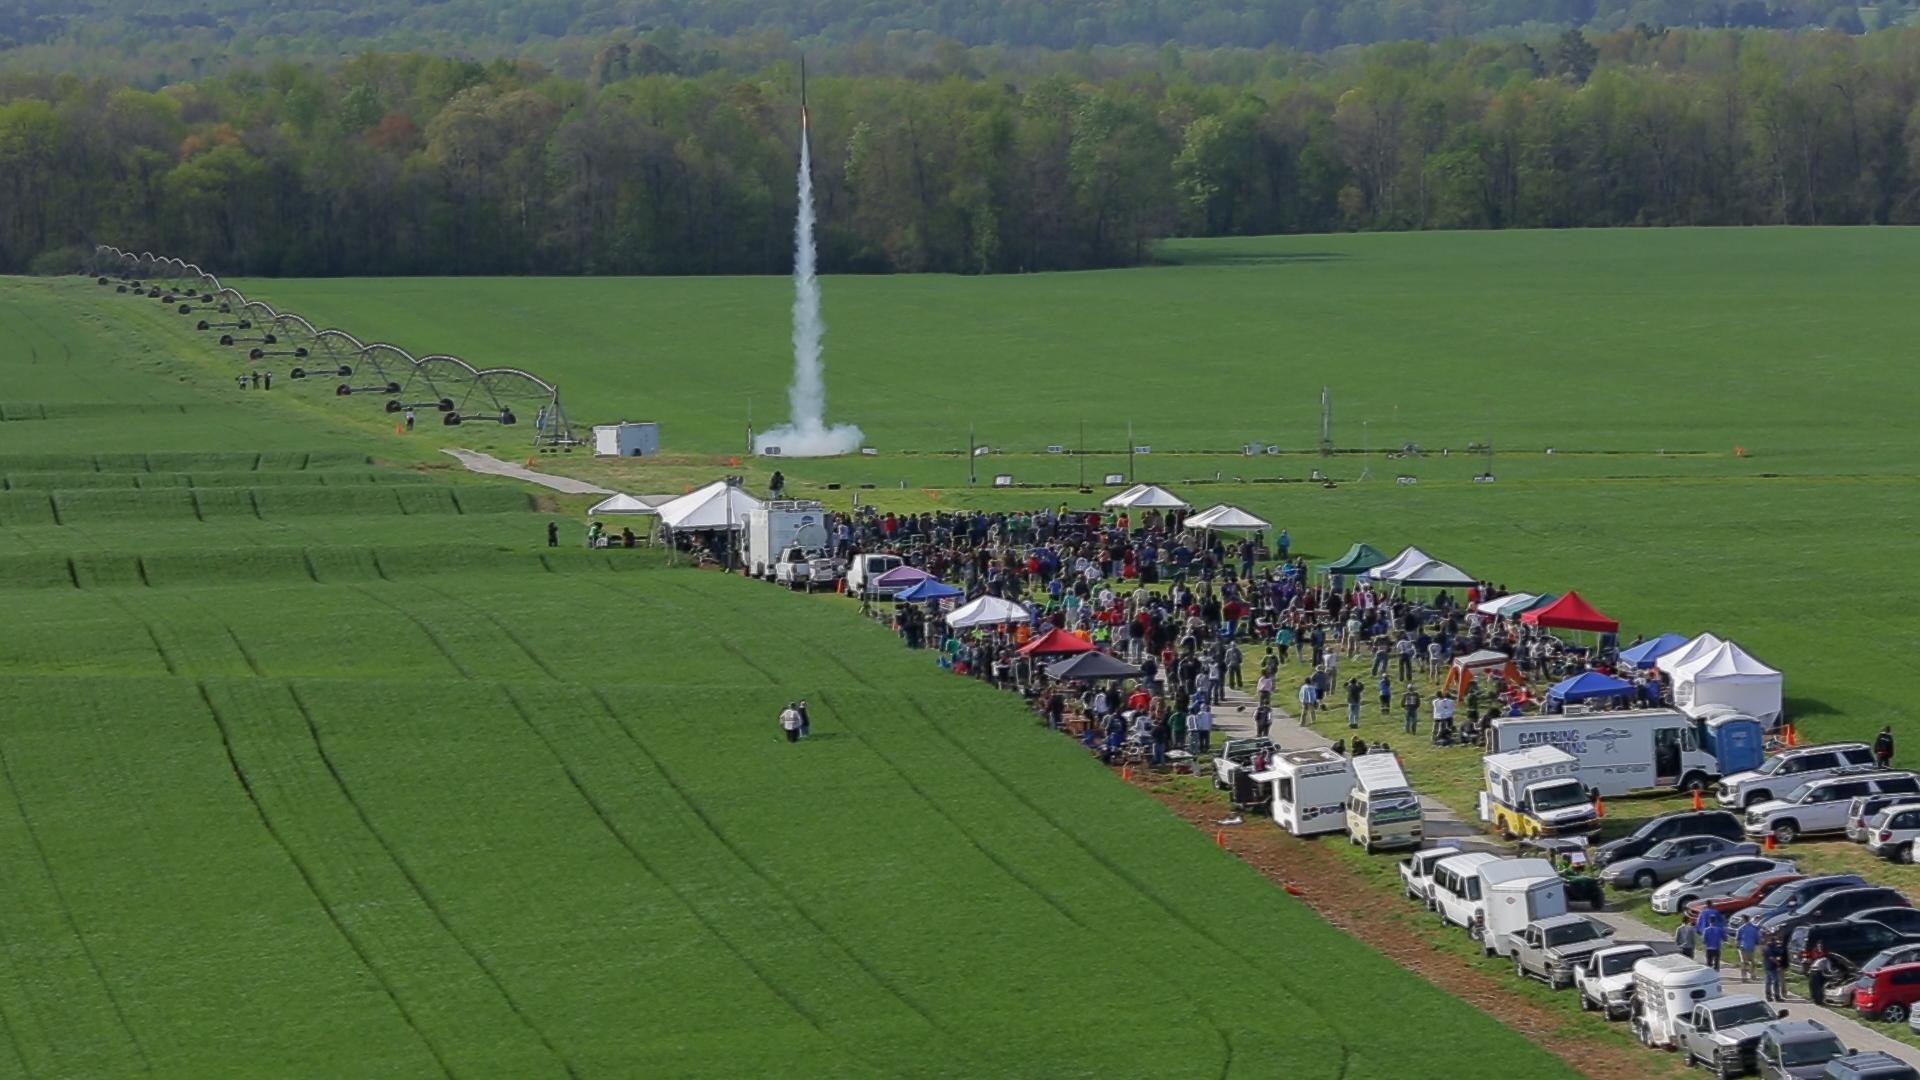 A patch of green field as a rocket from the student launch competition rises in the sky.